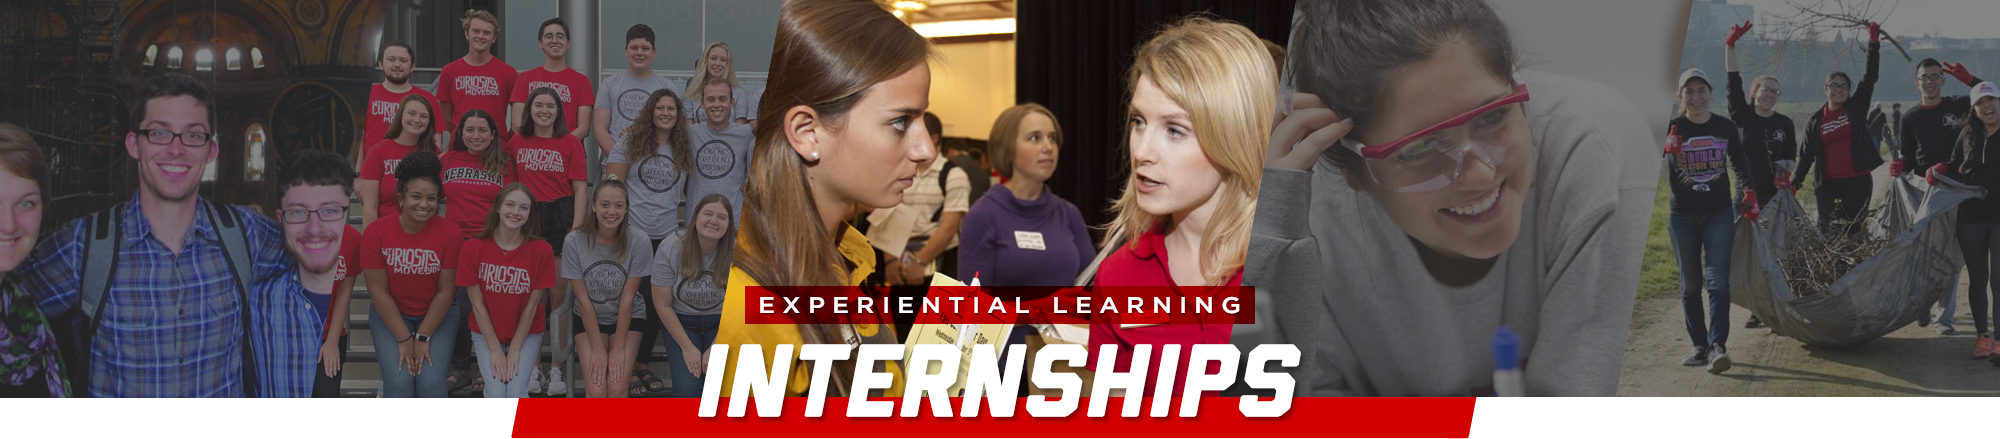 Internships - Experiential Learning